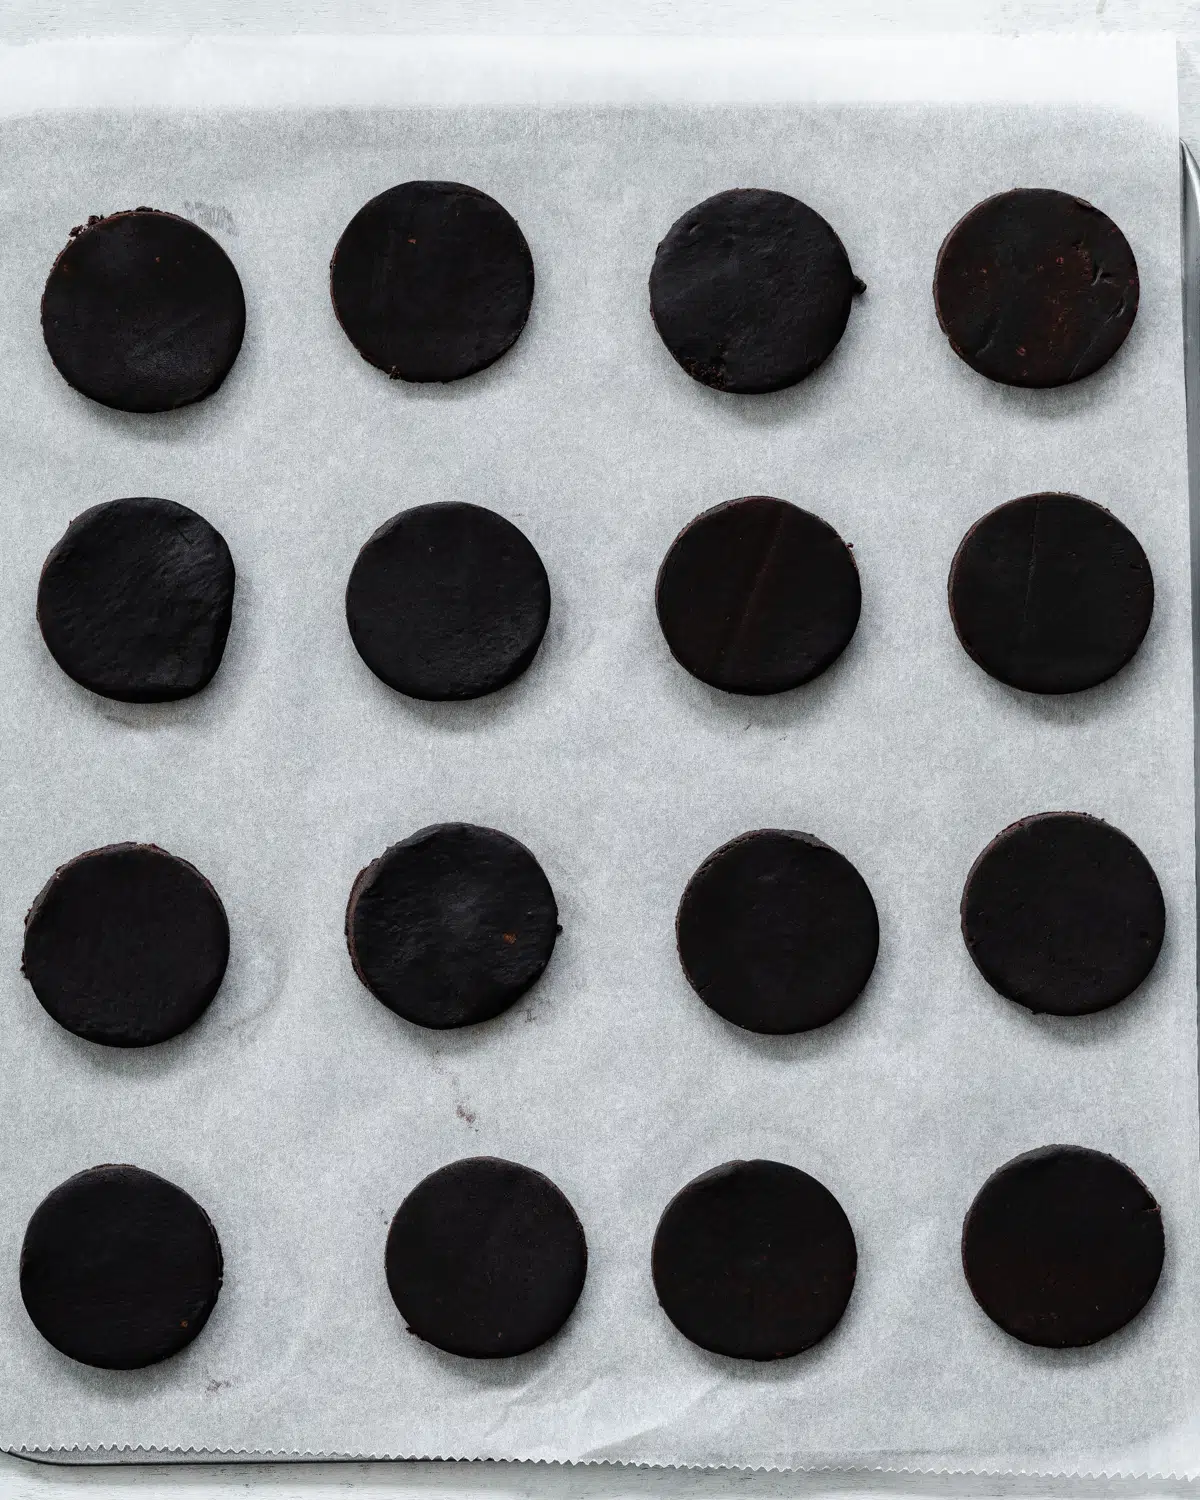 oreo cookies on a baking tray.